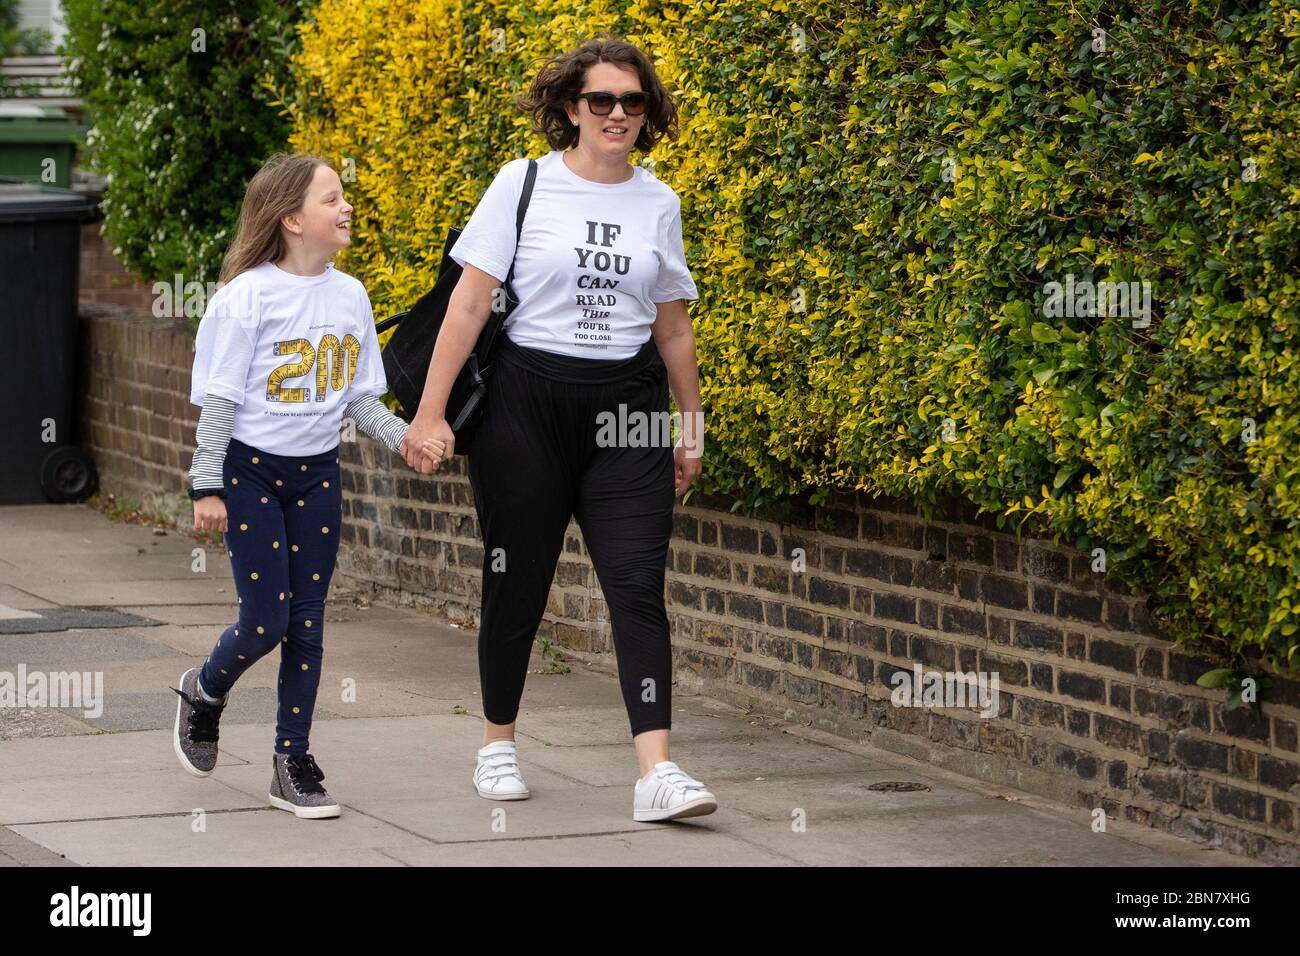 Fiona and her daughter Lola, from London, wearing T-shirts which include the slogan: 'If you can read this, you’re too close for COVID' that have been launched by the global brand transformation company FutureBrand as a not-for-profit initiative to help reinforce key social distancing guidelines as the nation emerges from the coronavirus pandemic lockdown. Stock Photo